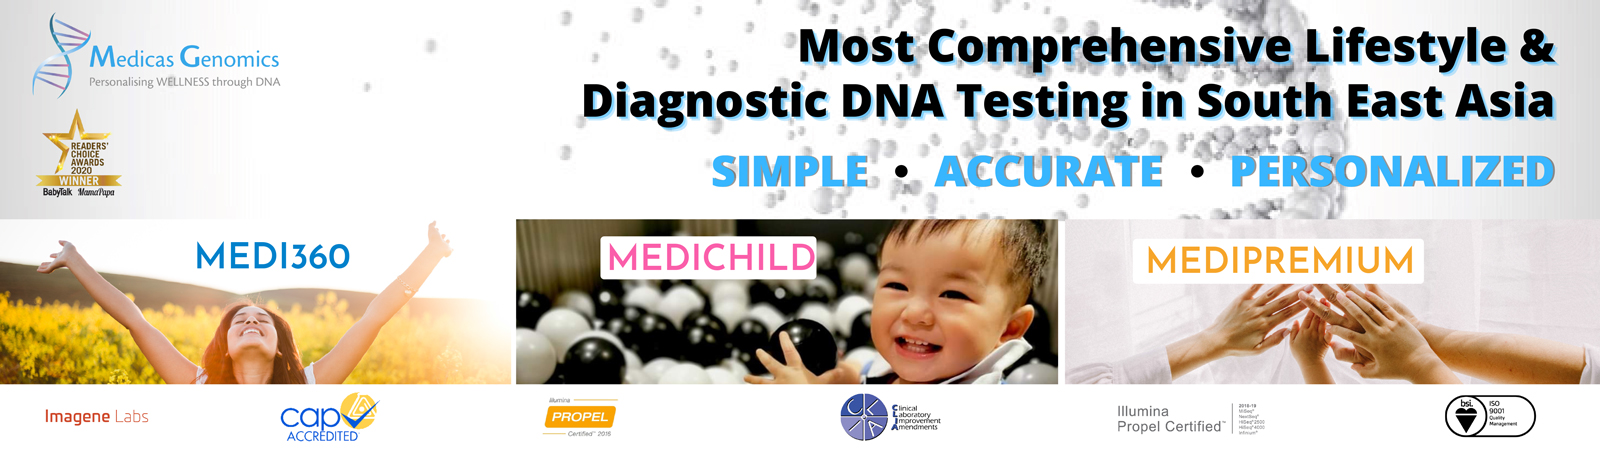 Medicas Genomics DNA Test for Family: A gift which is truly unique and one of its kind